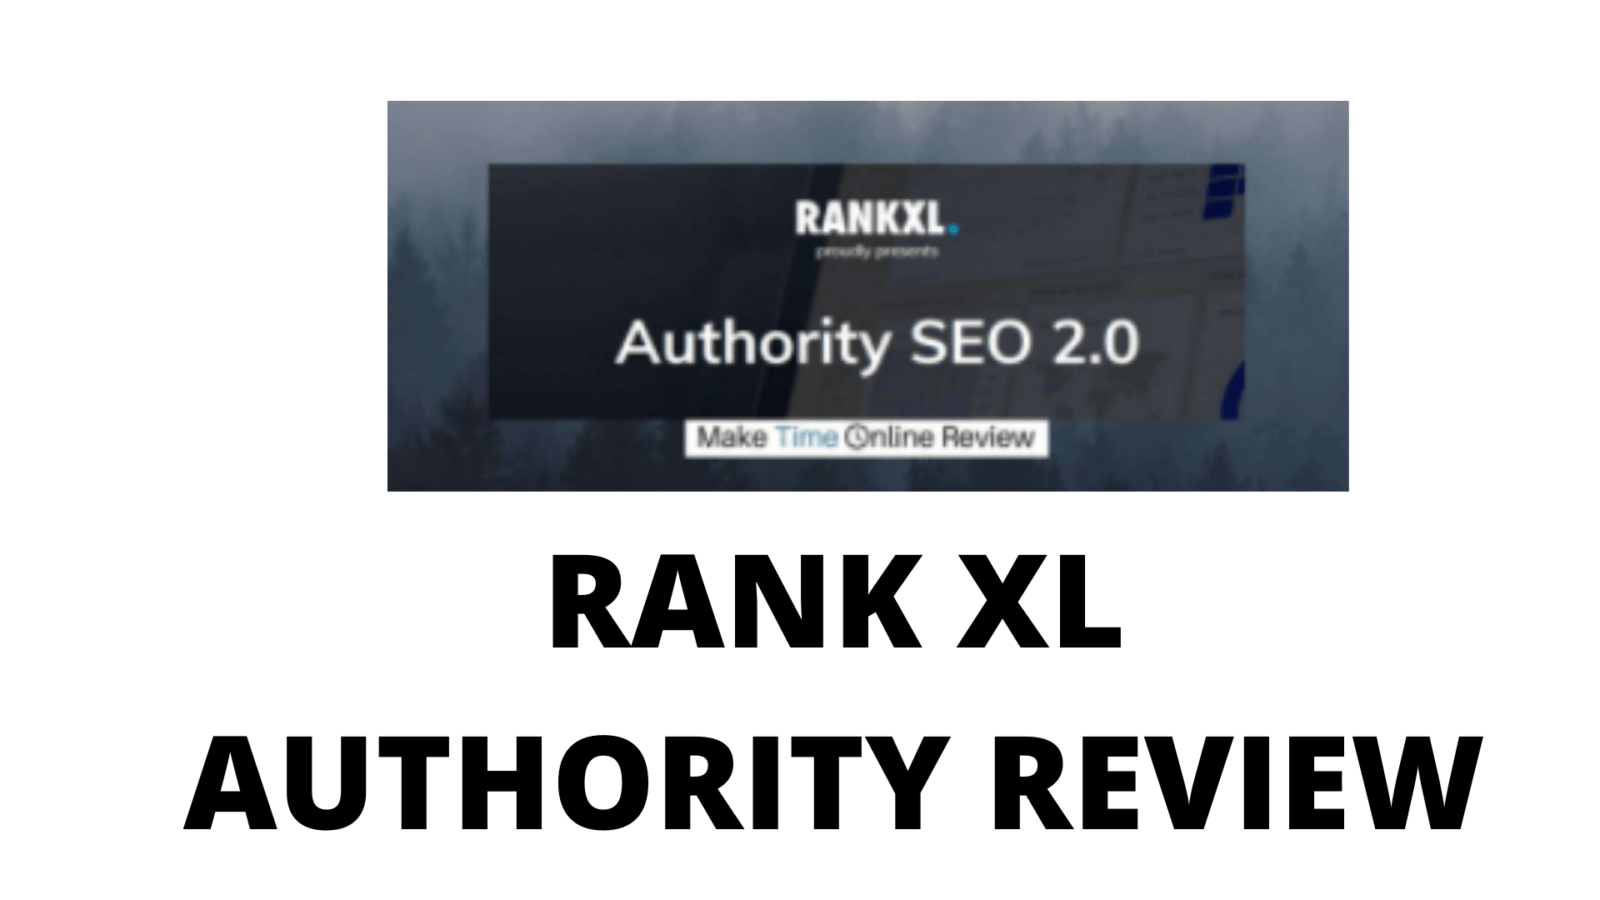 Rank XL Authority SEO Review